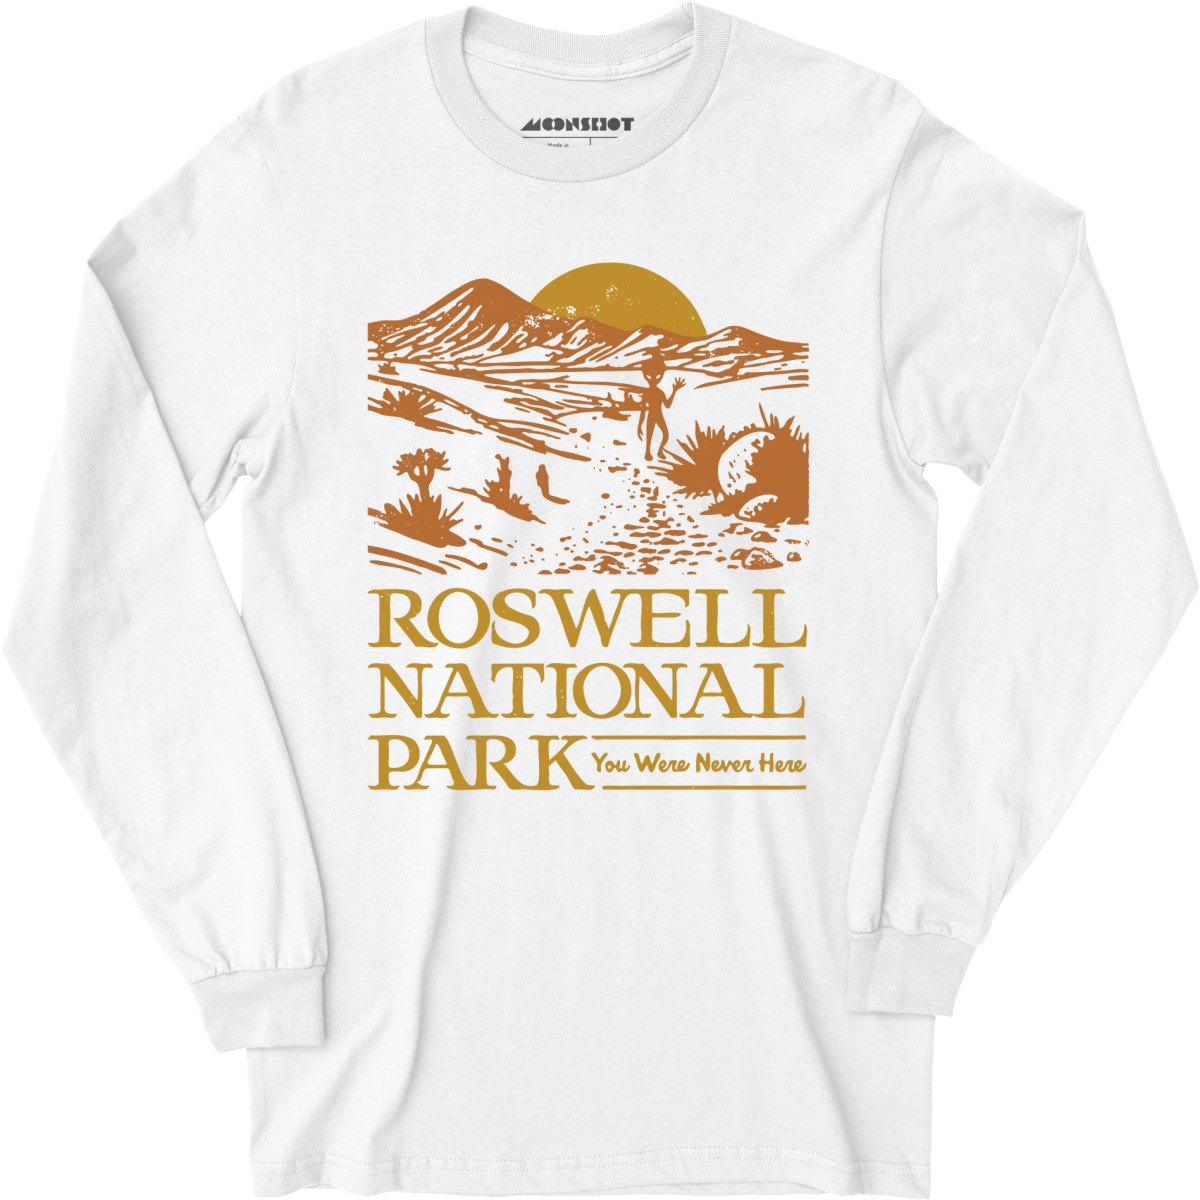 Roswell National Park - Long Sleeve T-Shirt